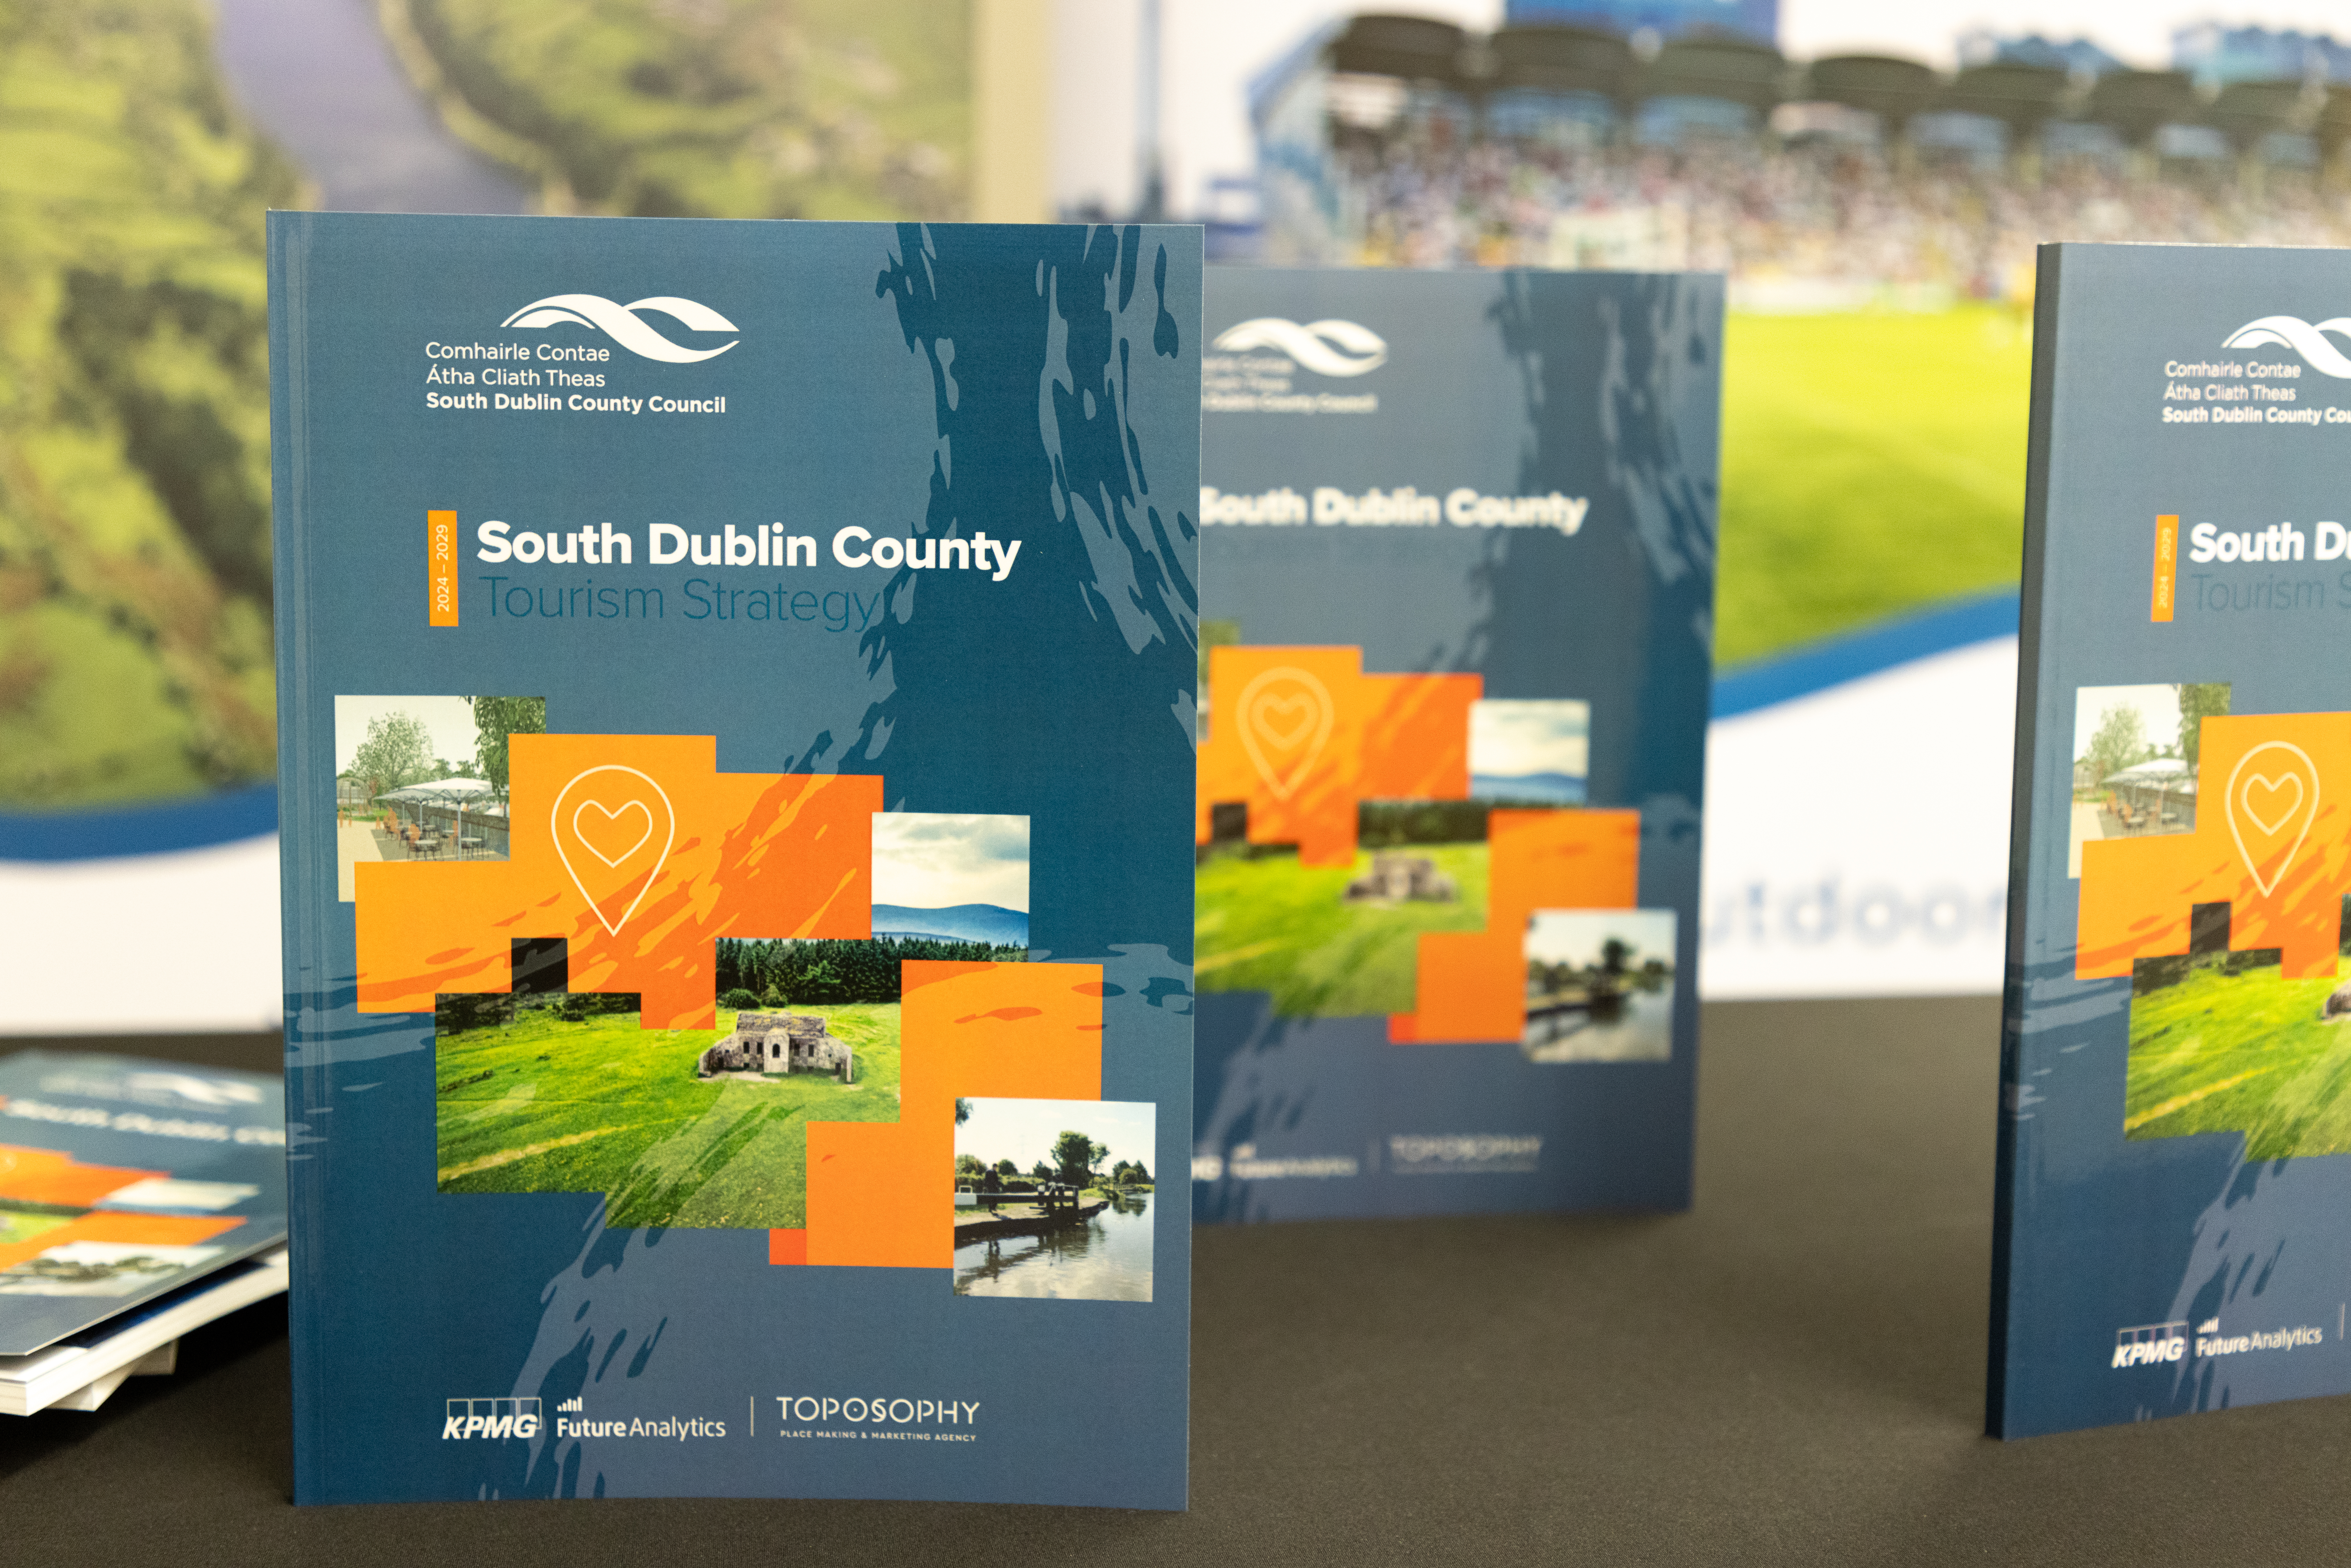 Mayor of South Dublin County Council launches 5 year Tourism Strategy sumamry image